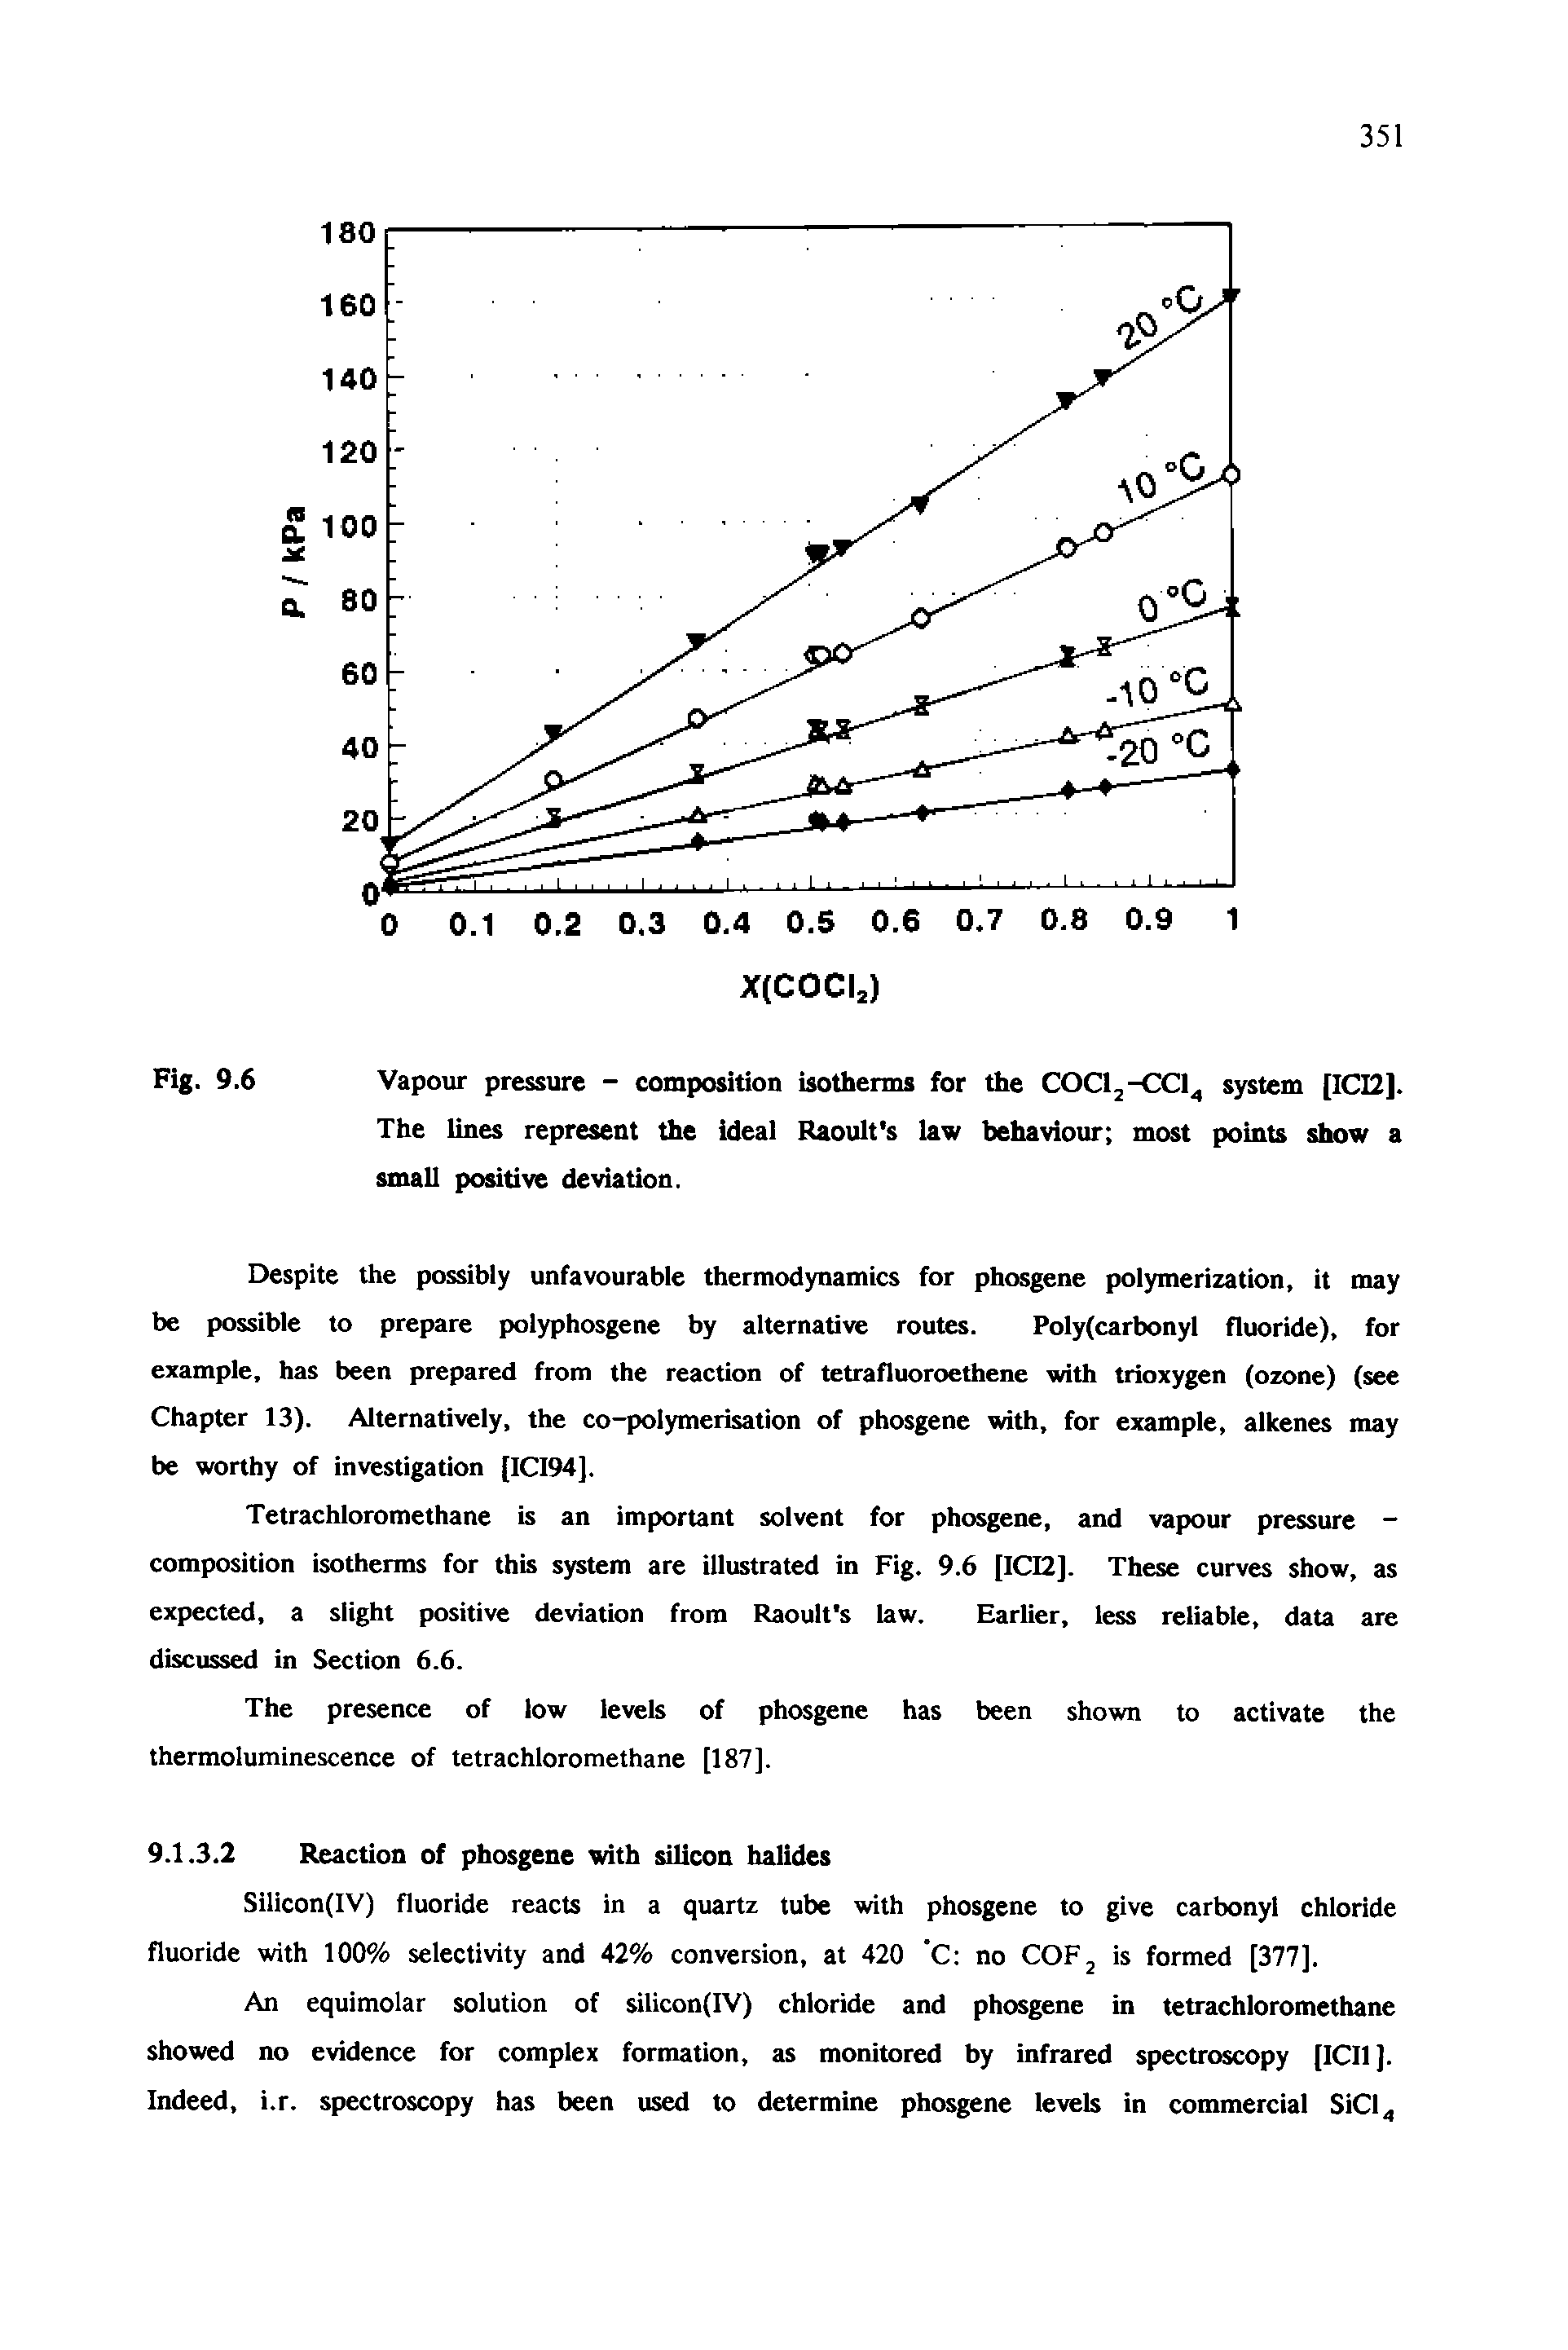 Fig. 9.6 Vapour pressure - composition isotherms for the COClj-CCl system [ICI2].